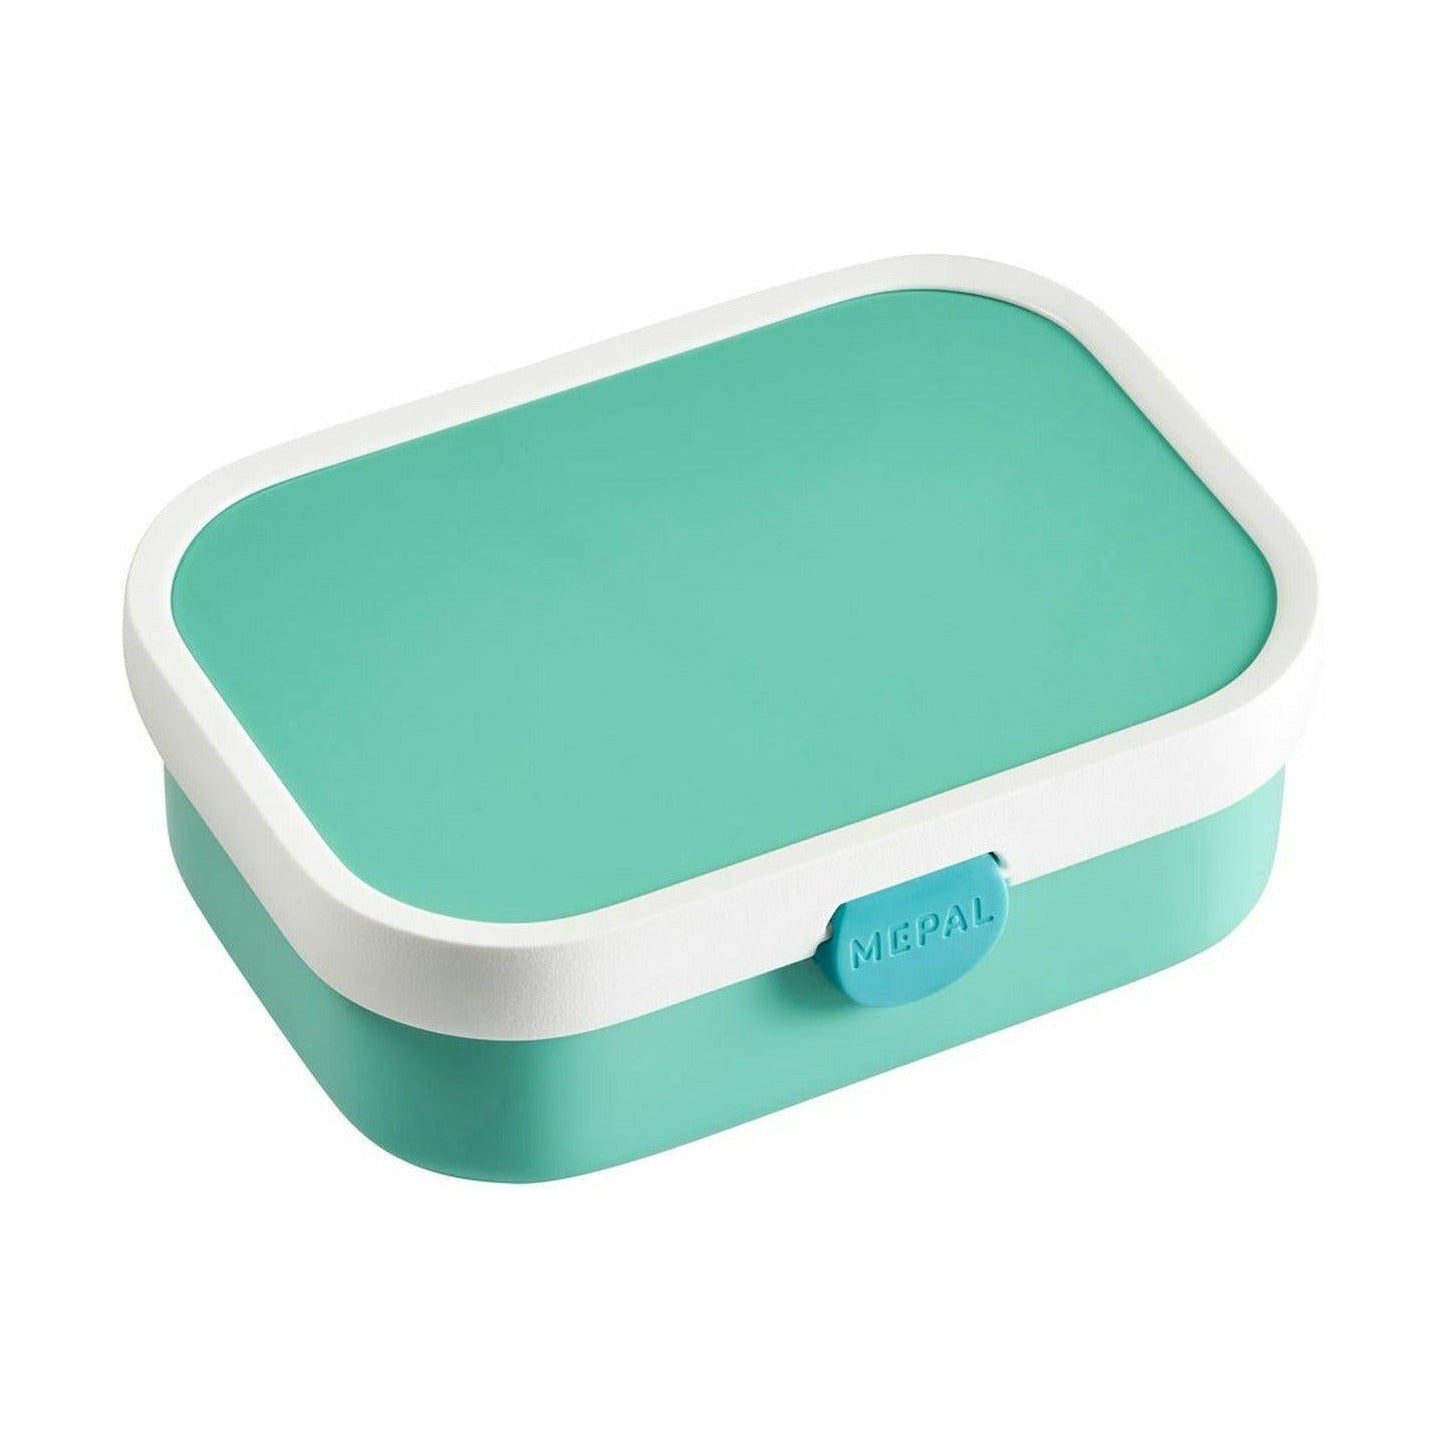 Mepal Campus Campus Lunch Box, Turquoise